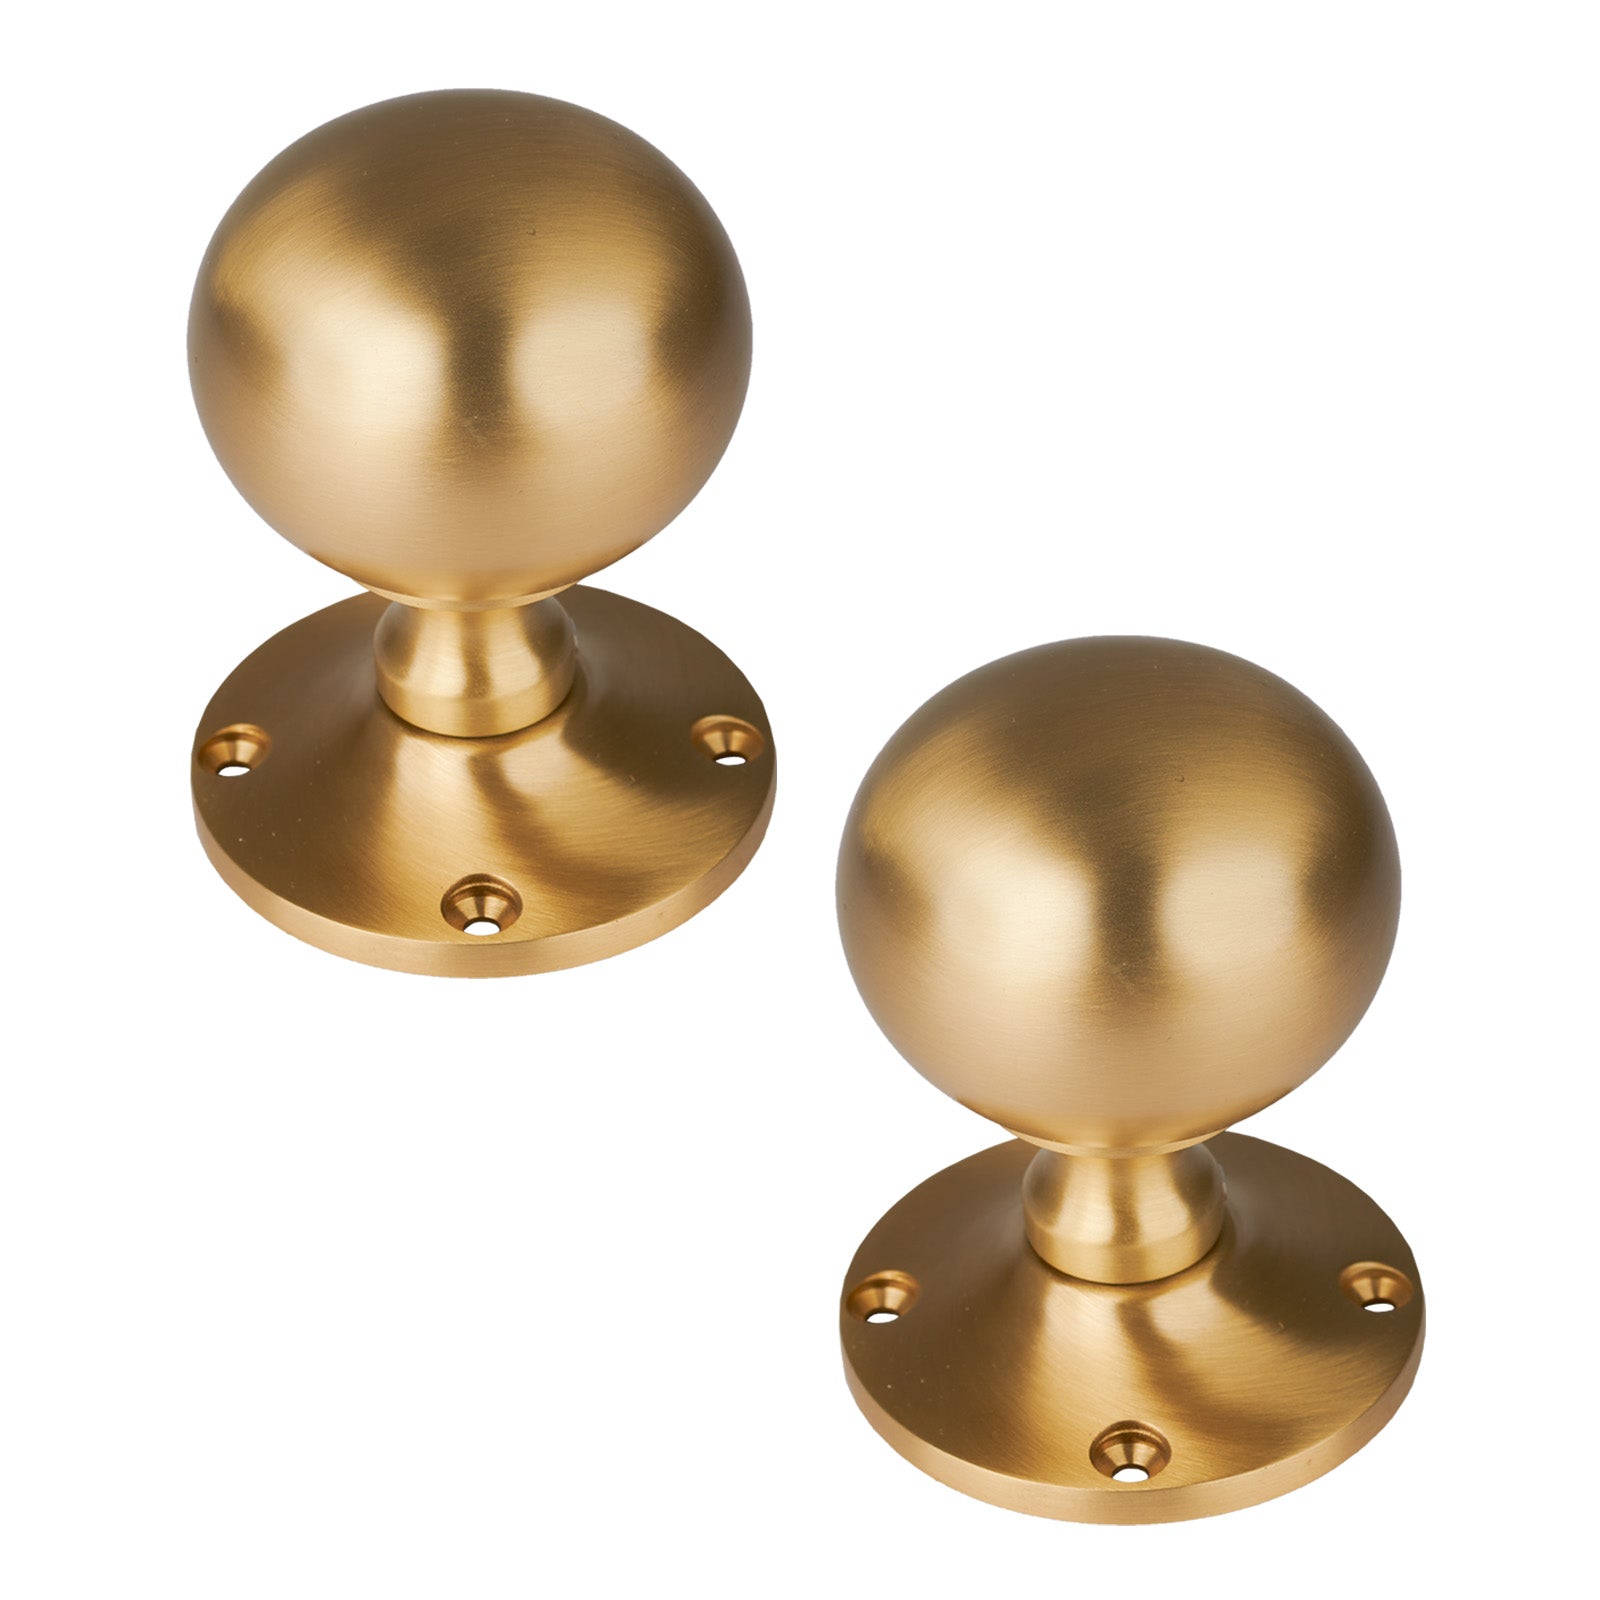 SHOW Westminster Door Knob on Rose in Satin Brass finish